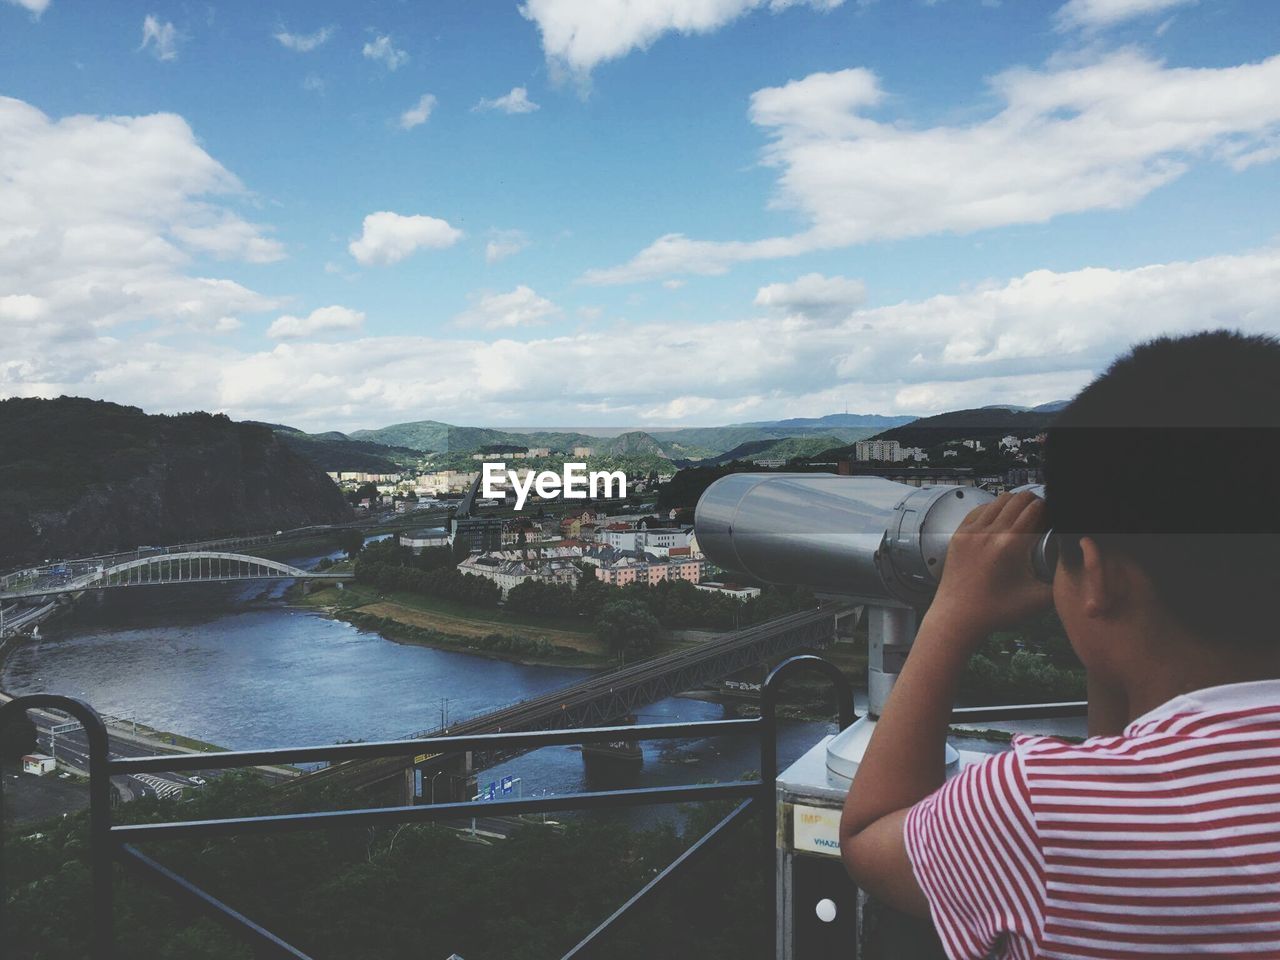 Boy looking through coin-operated binoculars at observation point by river